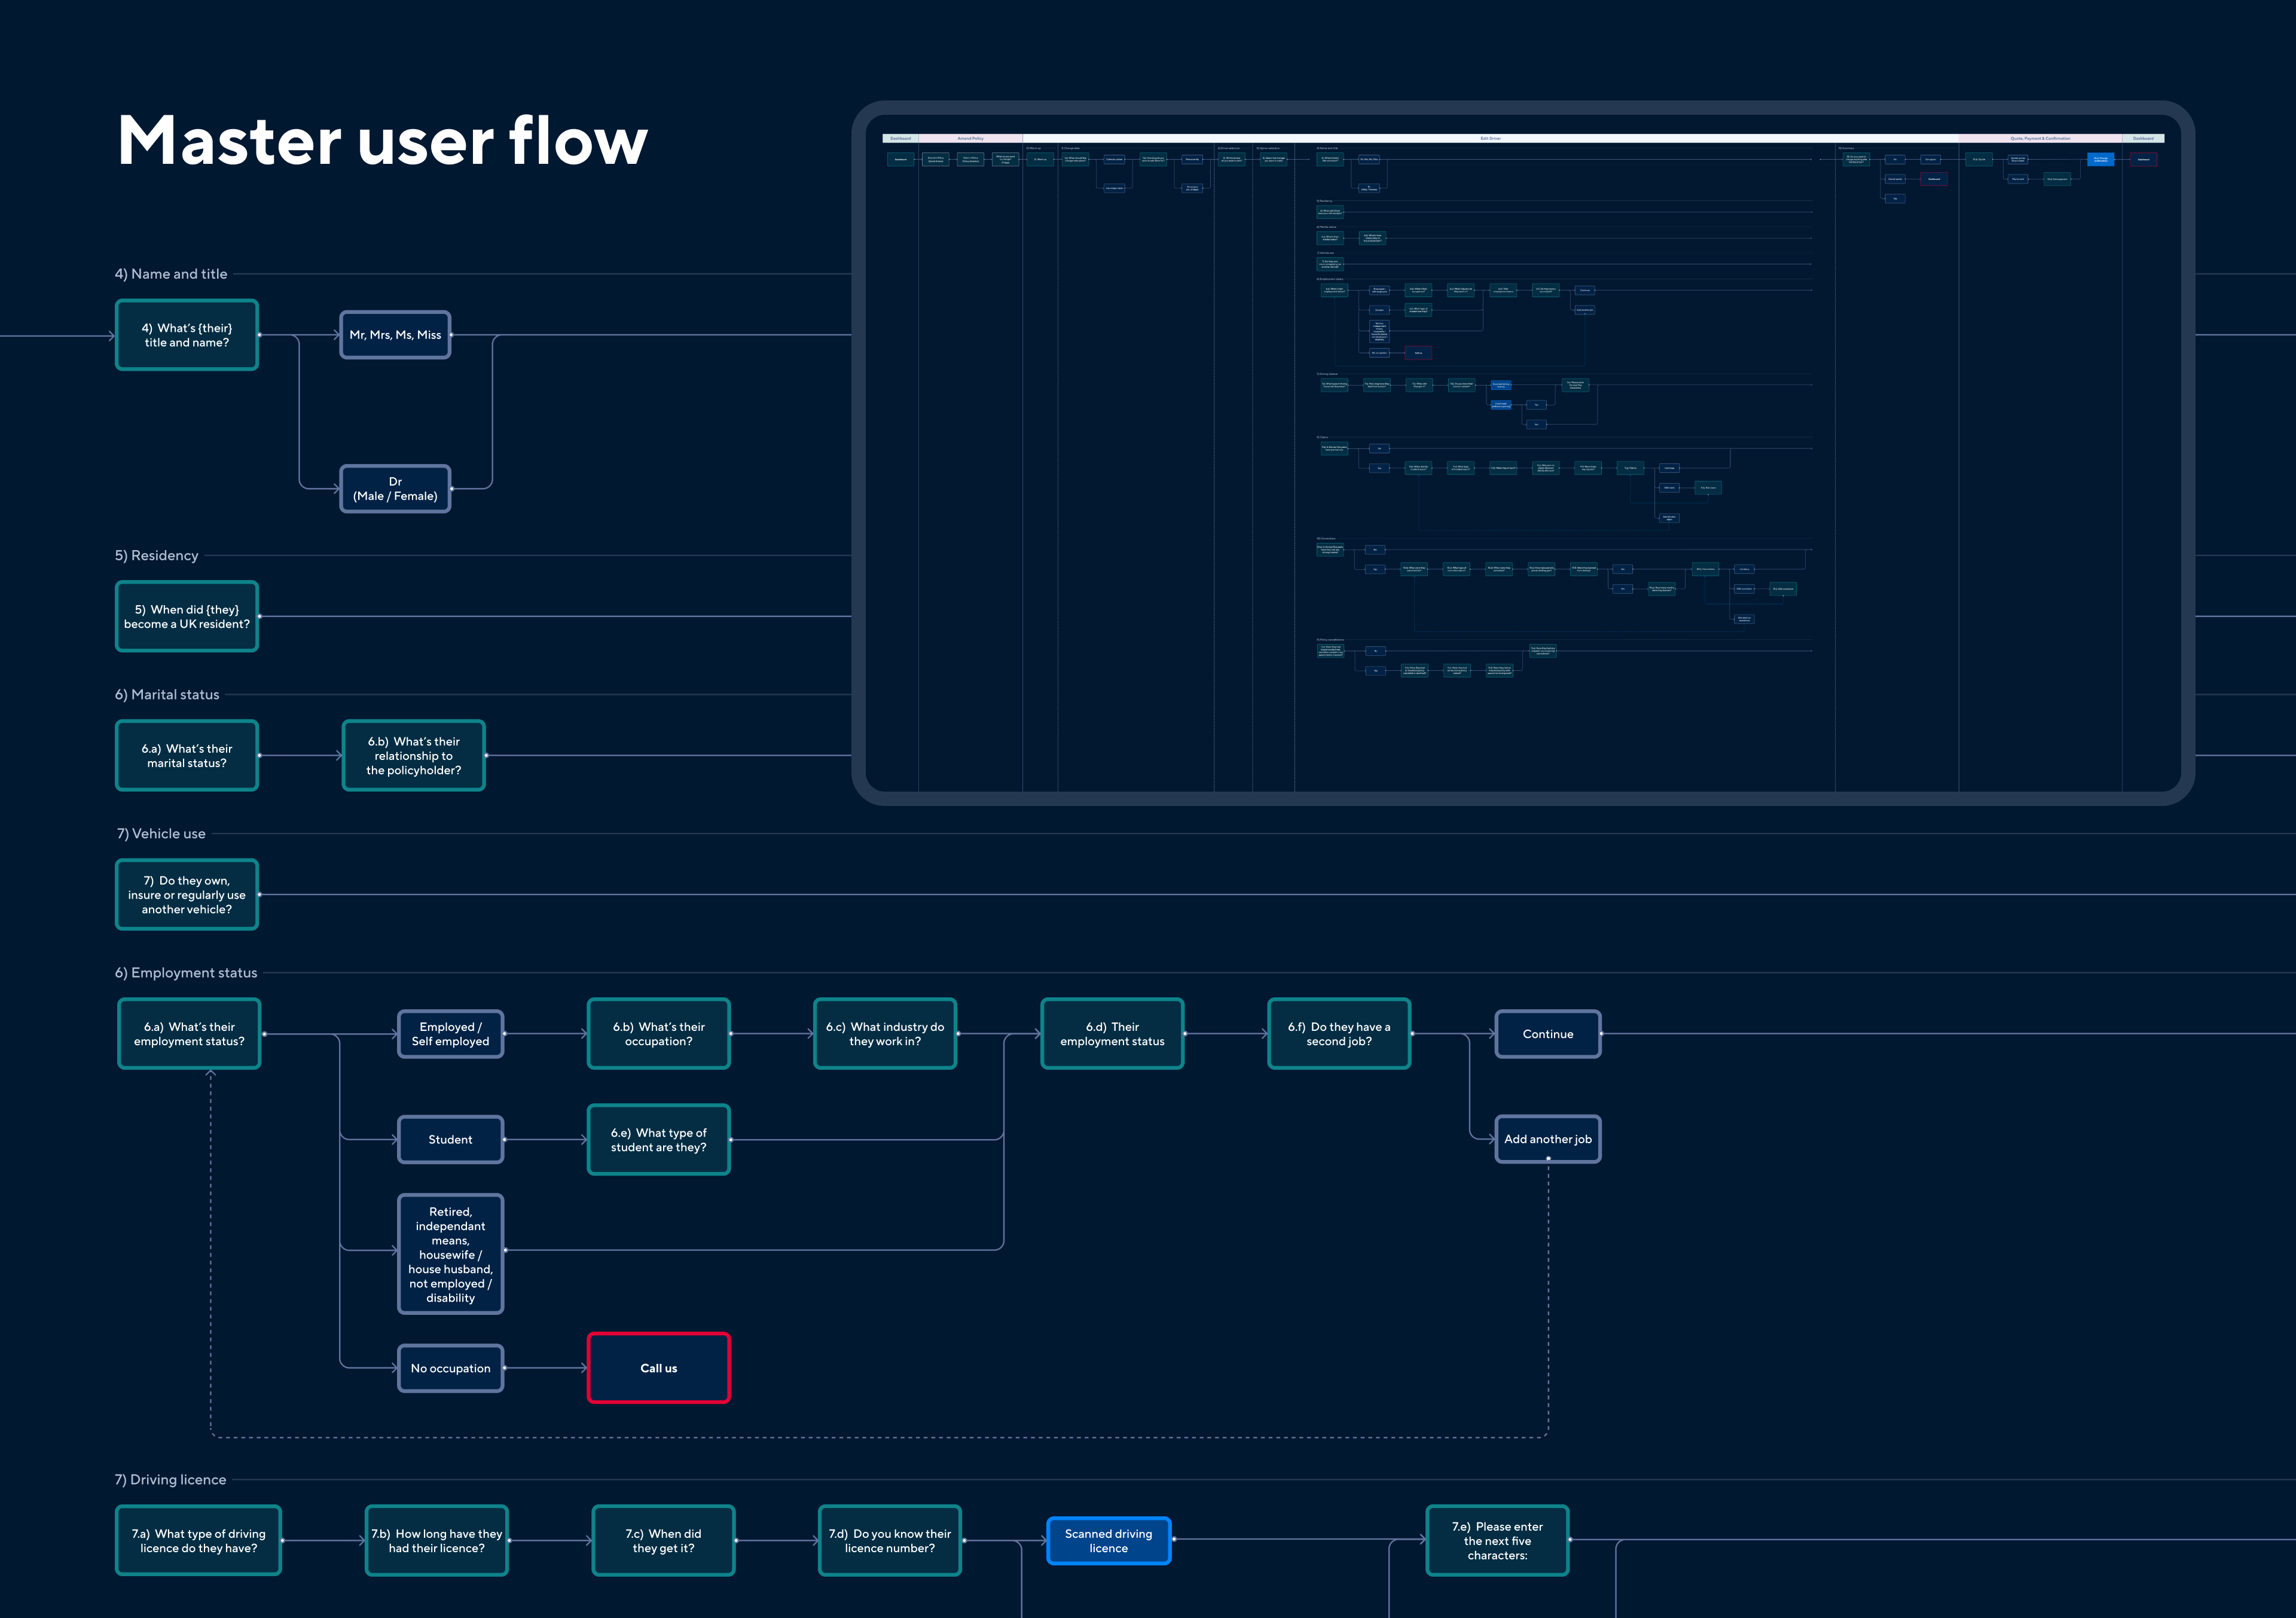 An image showing the master user flow for a Hastings customer